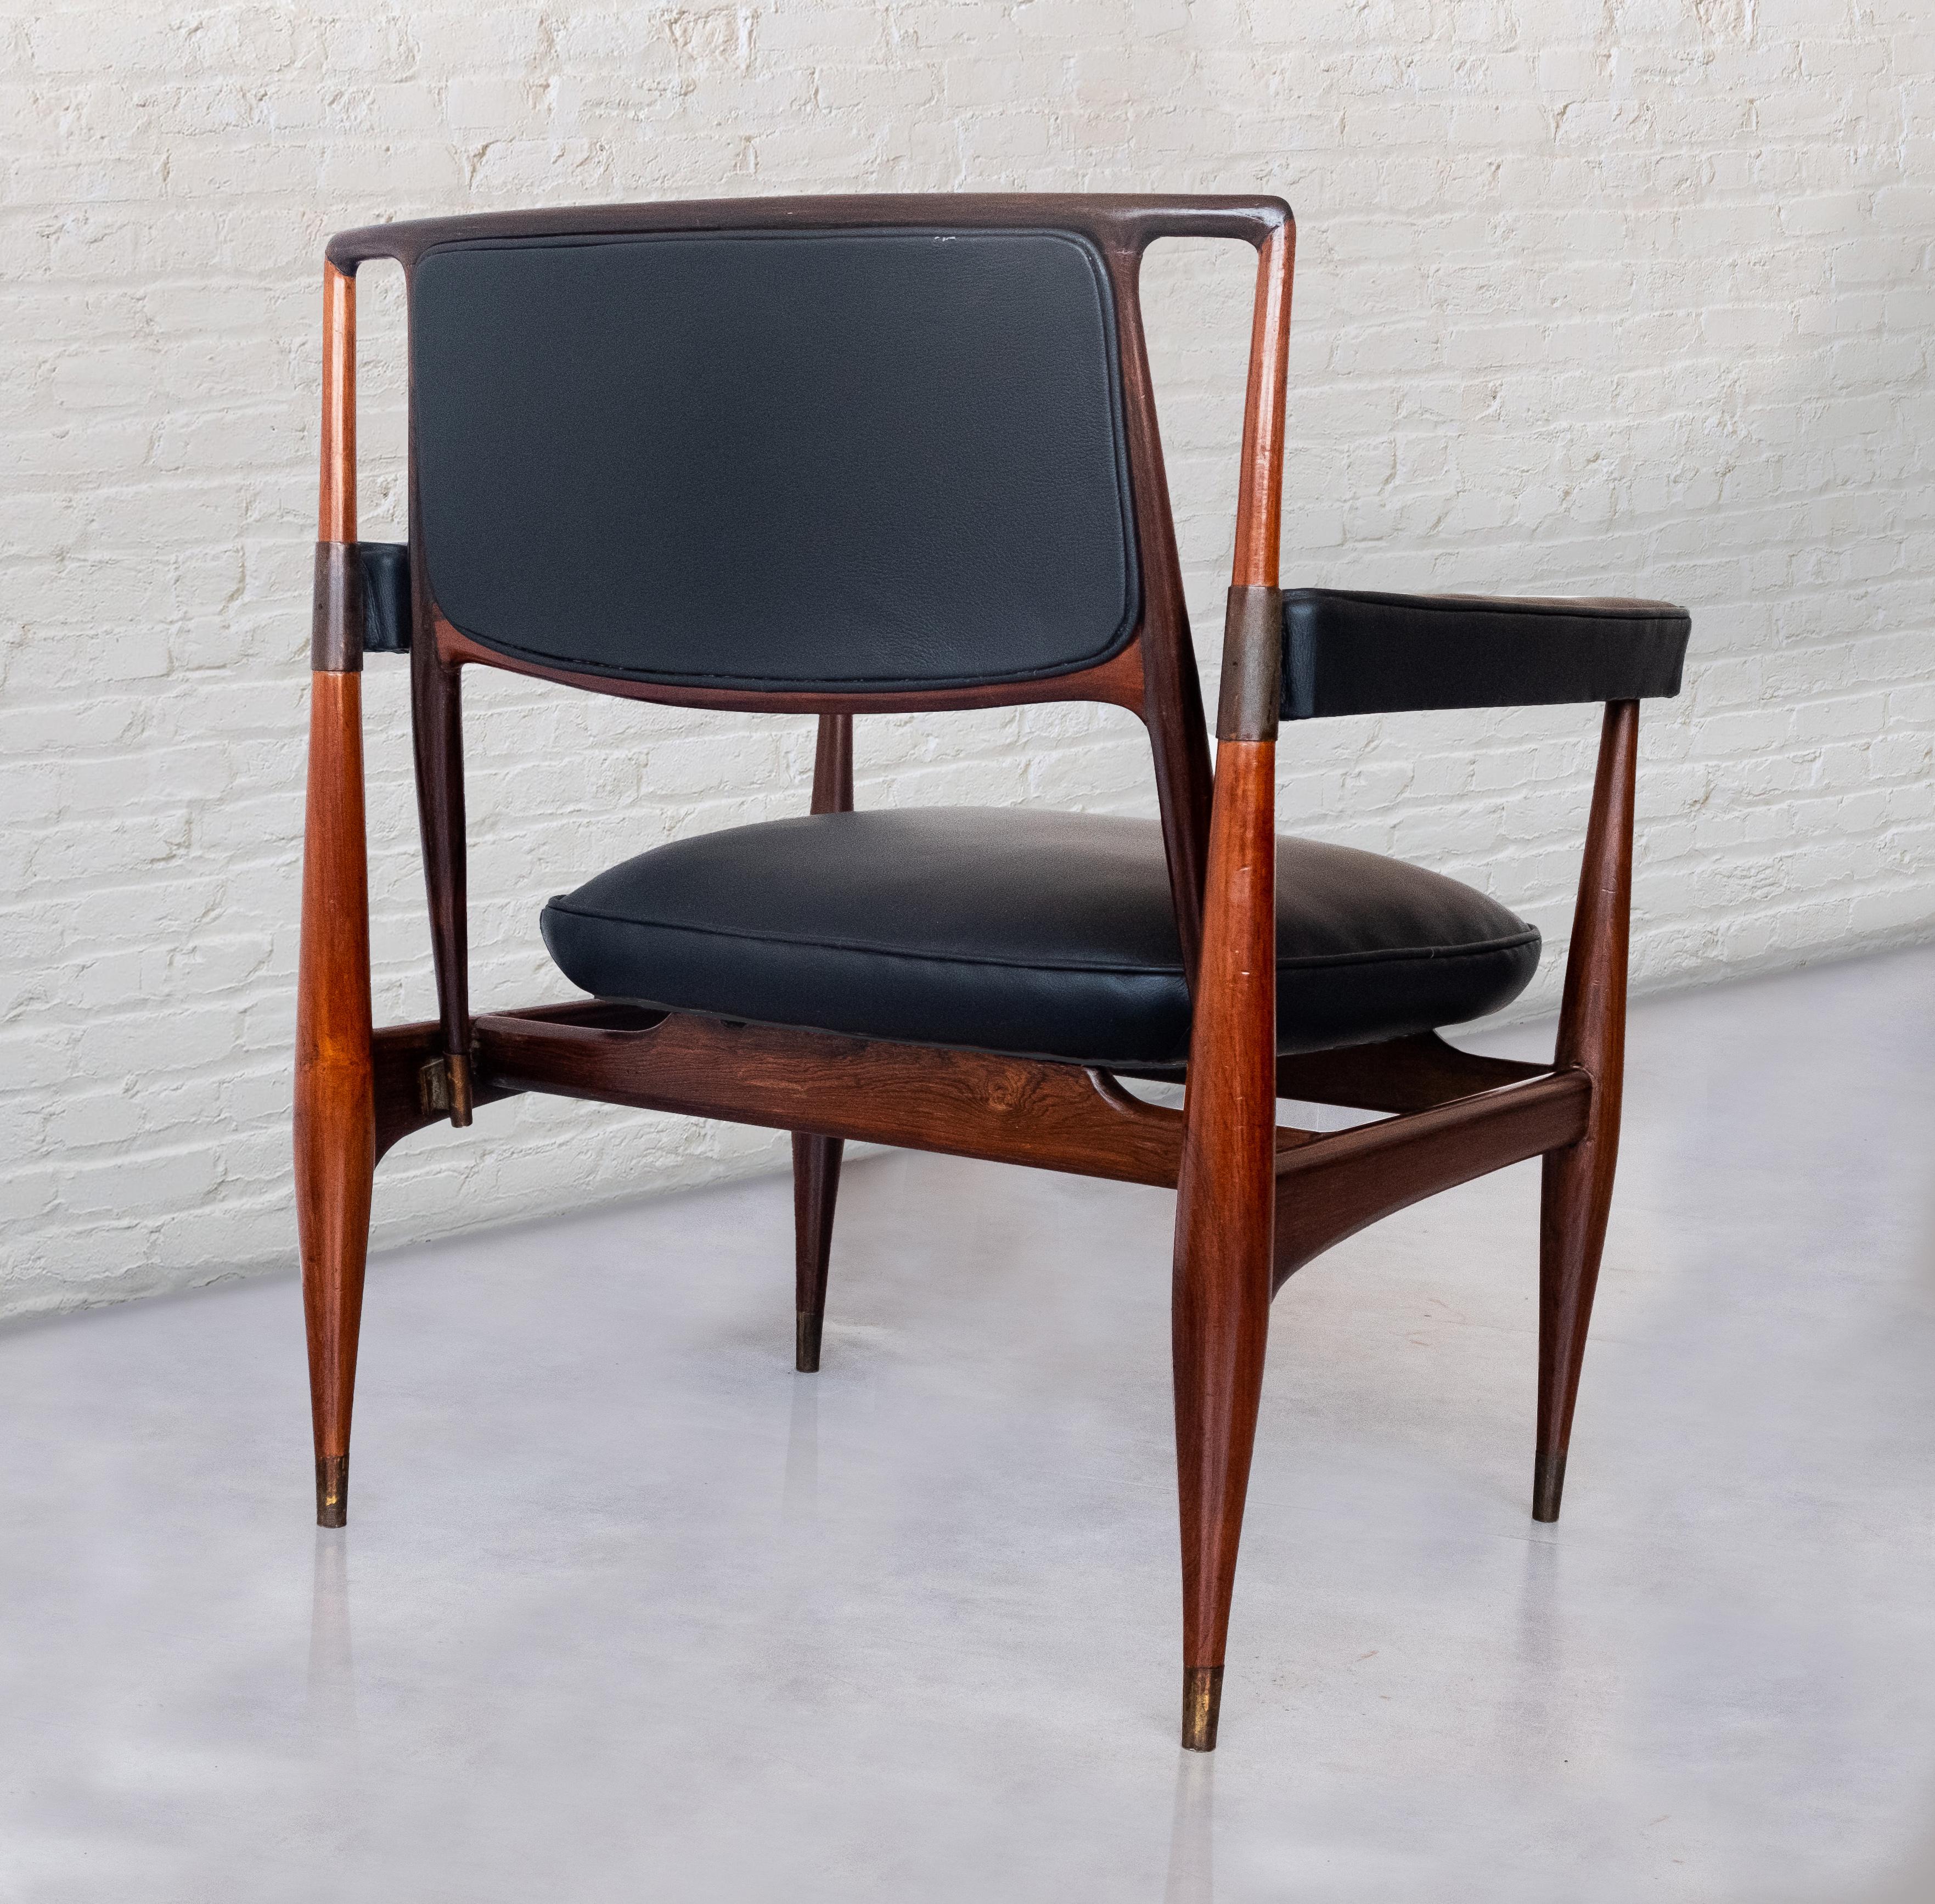 Móveis Ambiente, solid wood and leather armchair, 
Brasil, 1960s

A rare and exquisite armchair made in solid hardwood with brass fixing parts. 
Presenting very unique design features, this is a rare chair. 
This piece appears in a 1962 project by